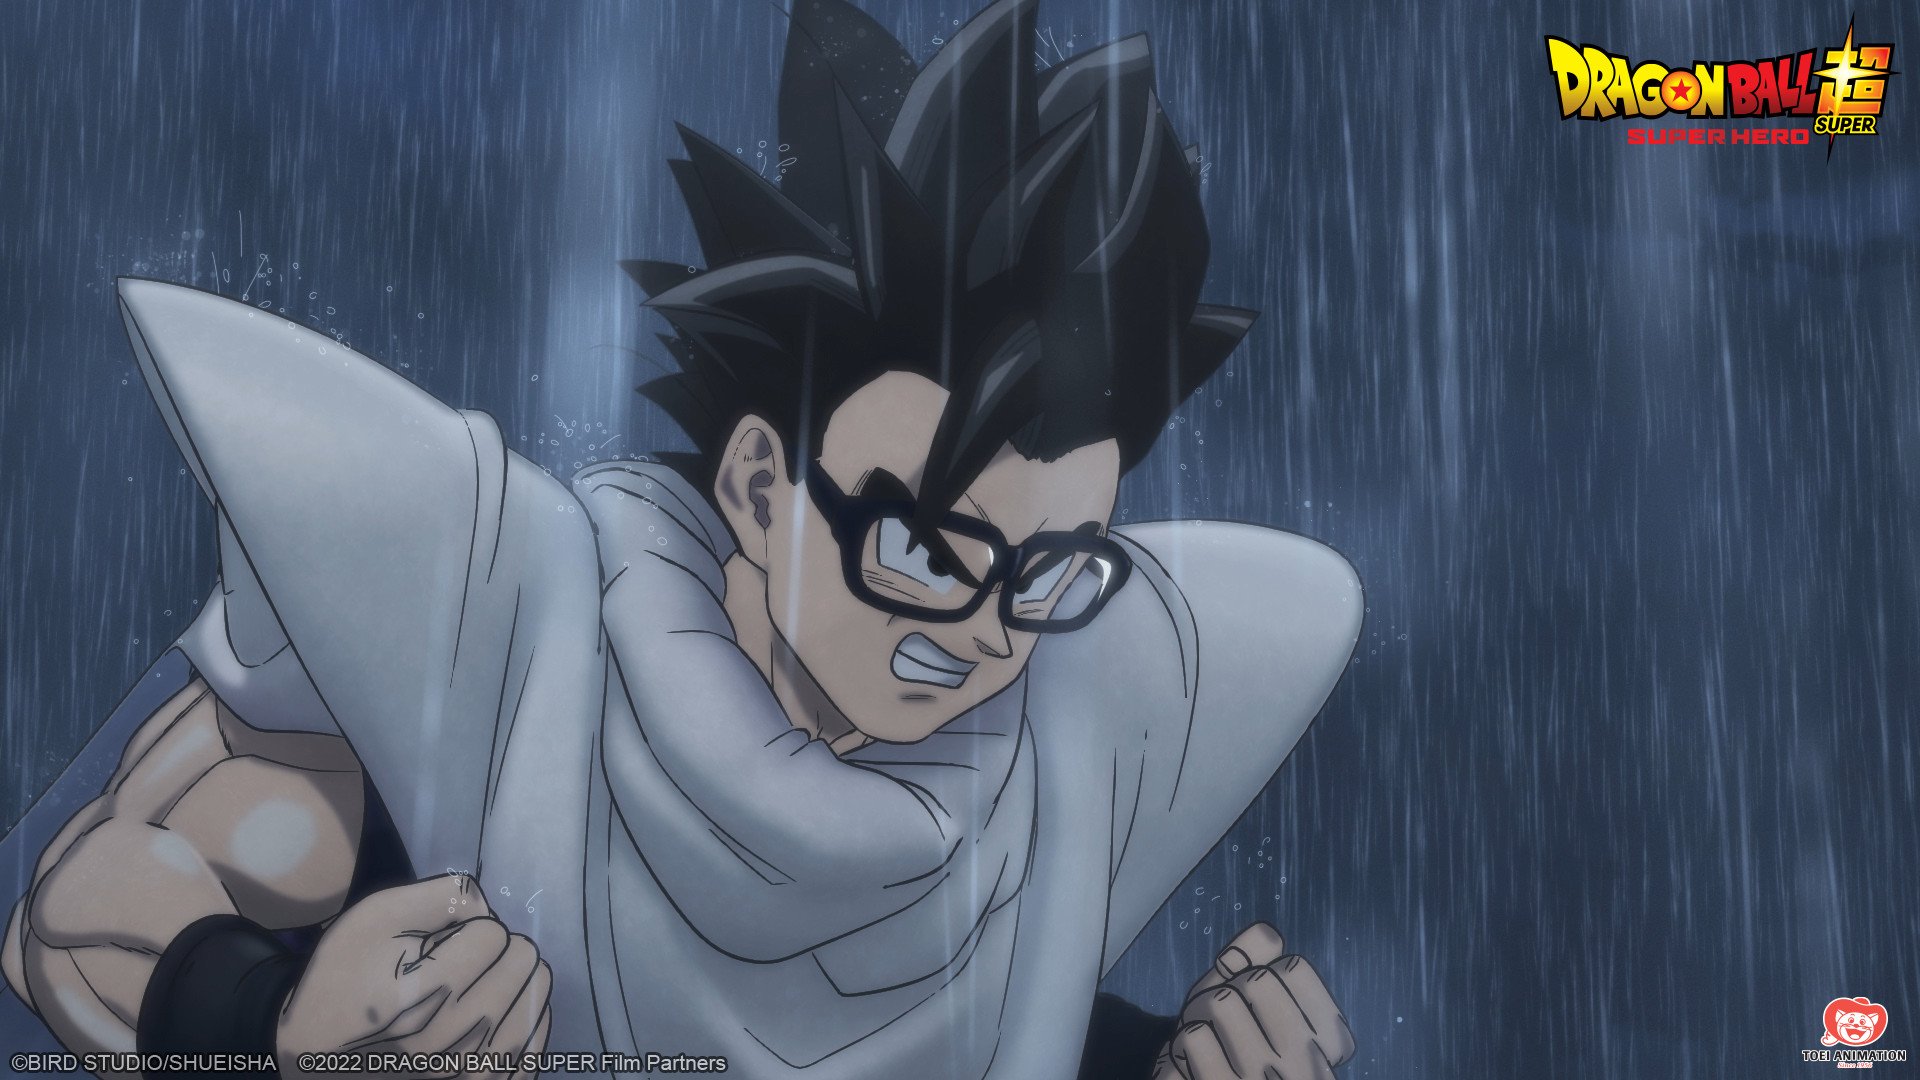 ‘Dragon Ball Super: Super Hero’: Is There an End-Credits Scene?